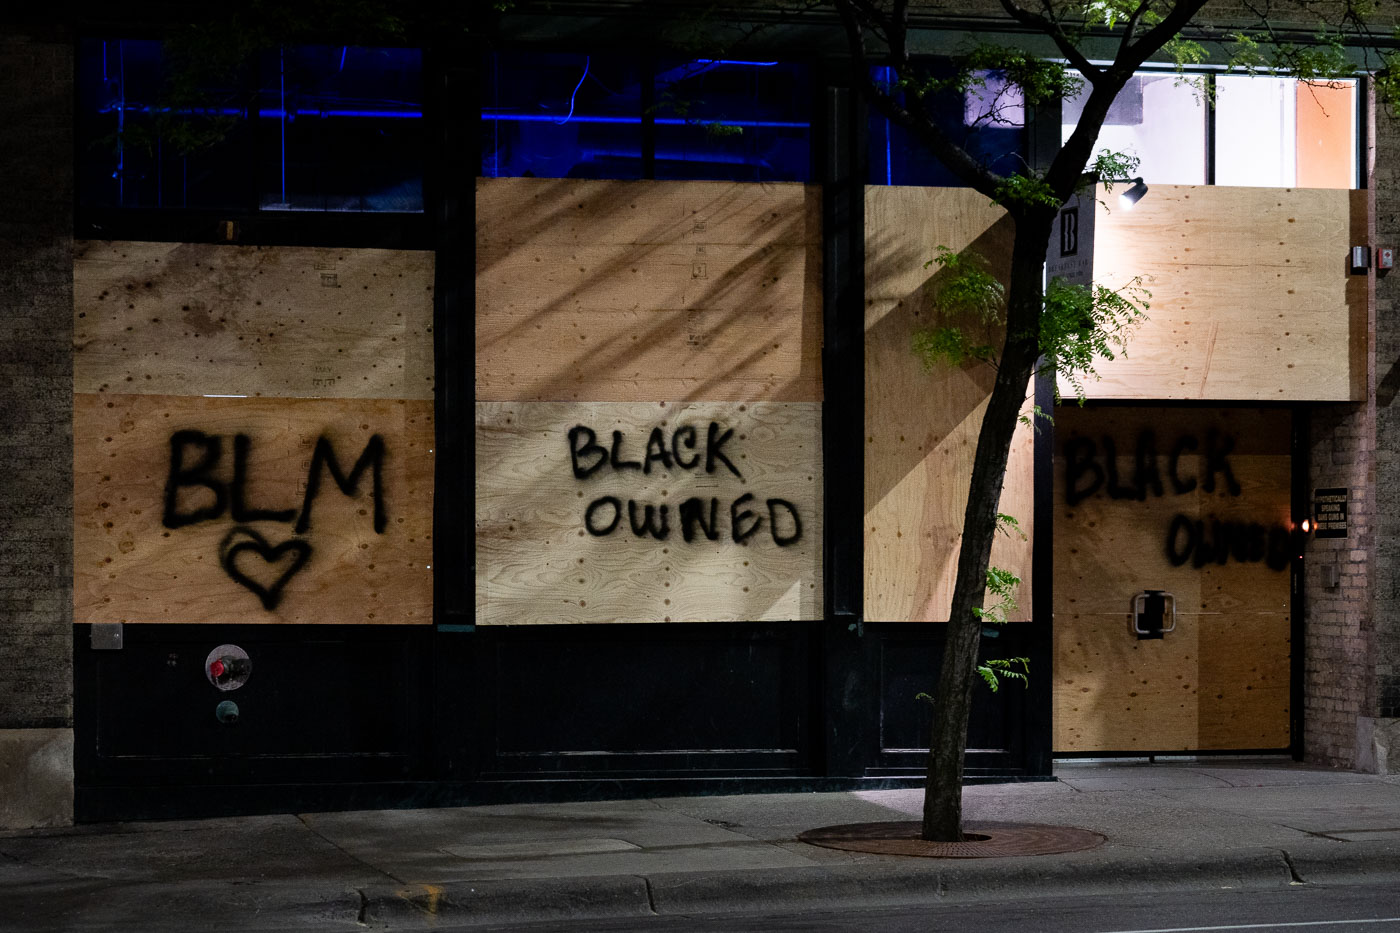 BLM and Black Owned written on Downtown boards